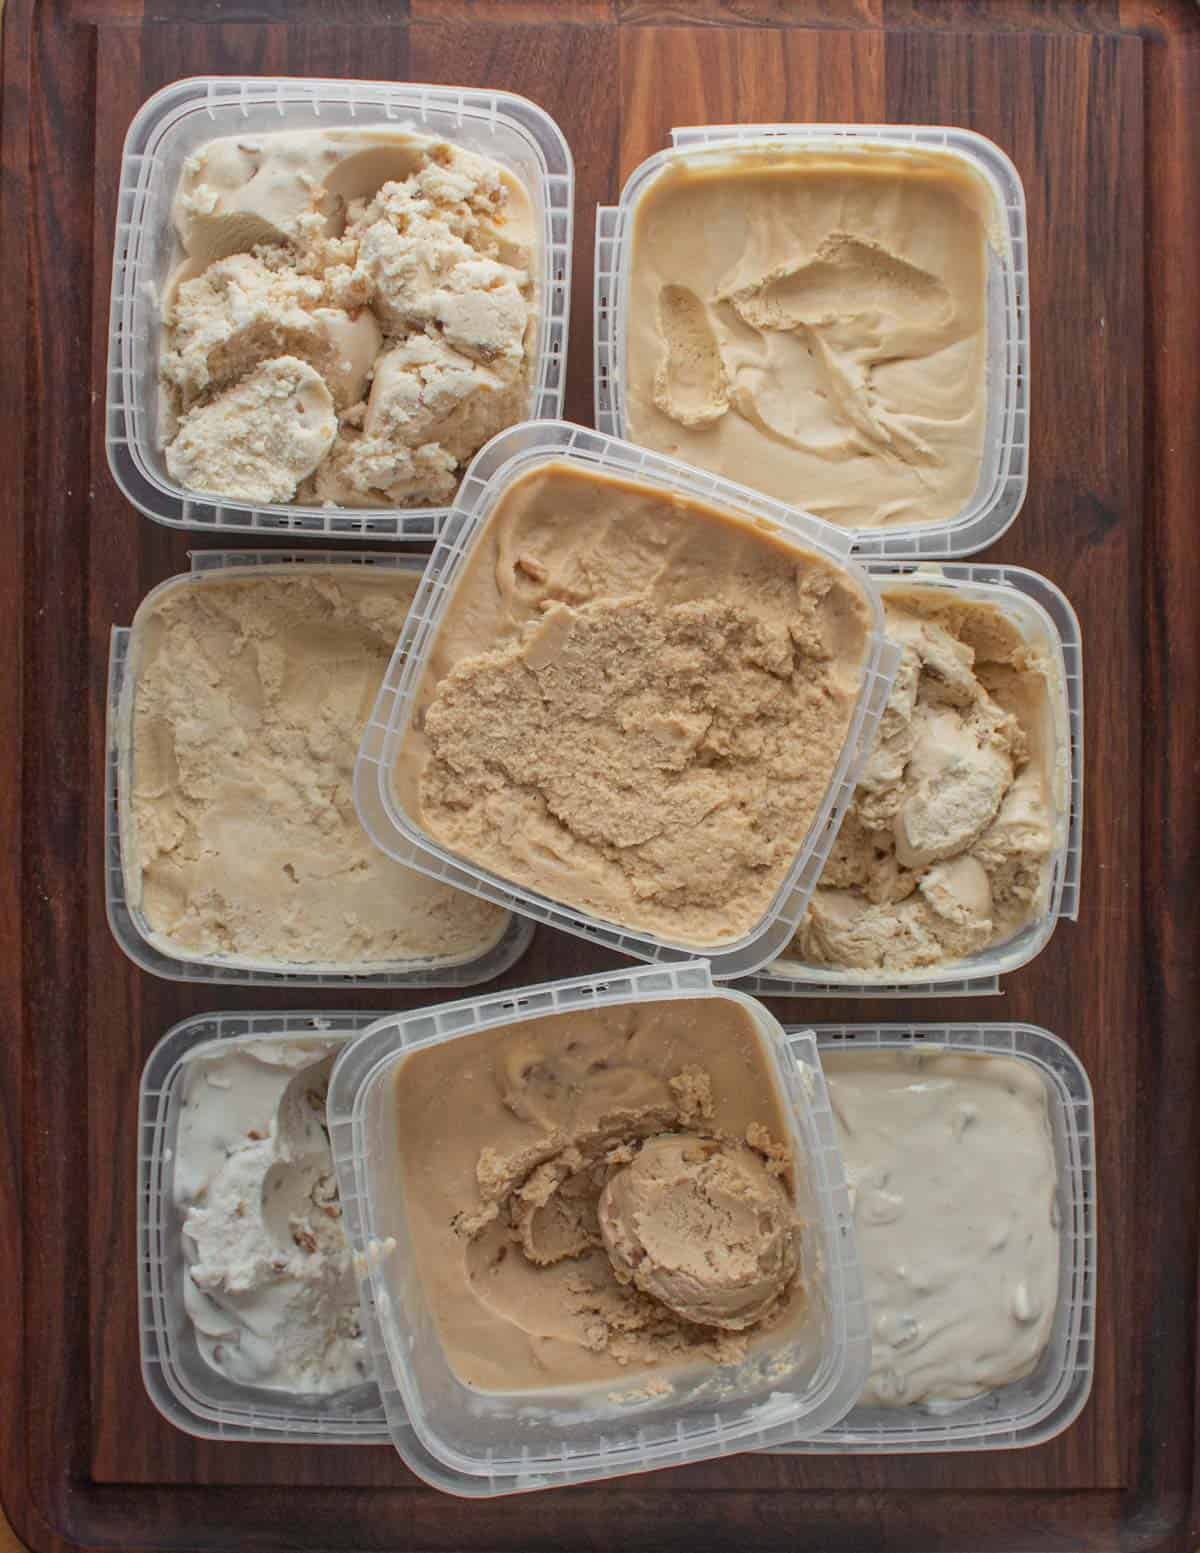 8 containers containing different versions of black walnut ice cream